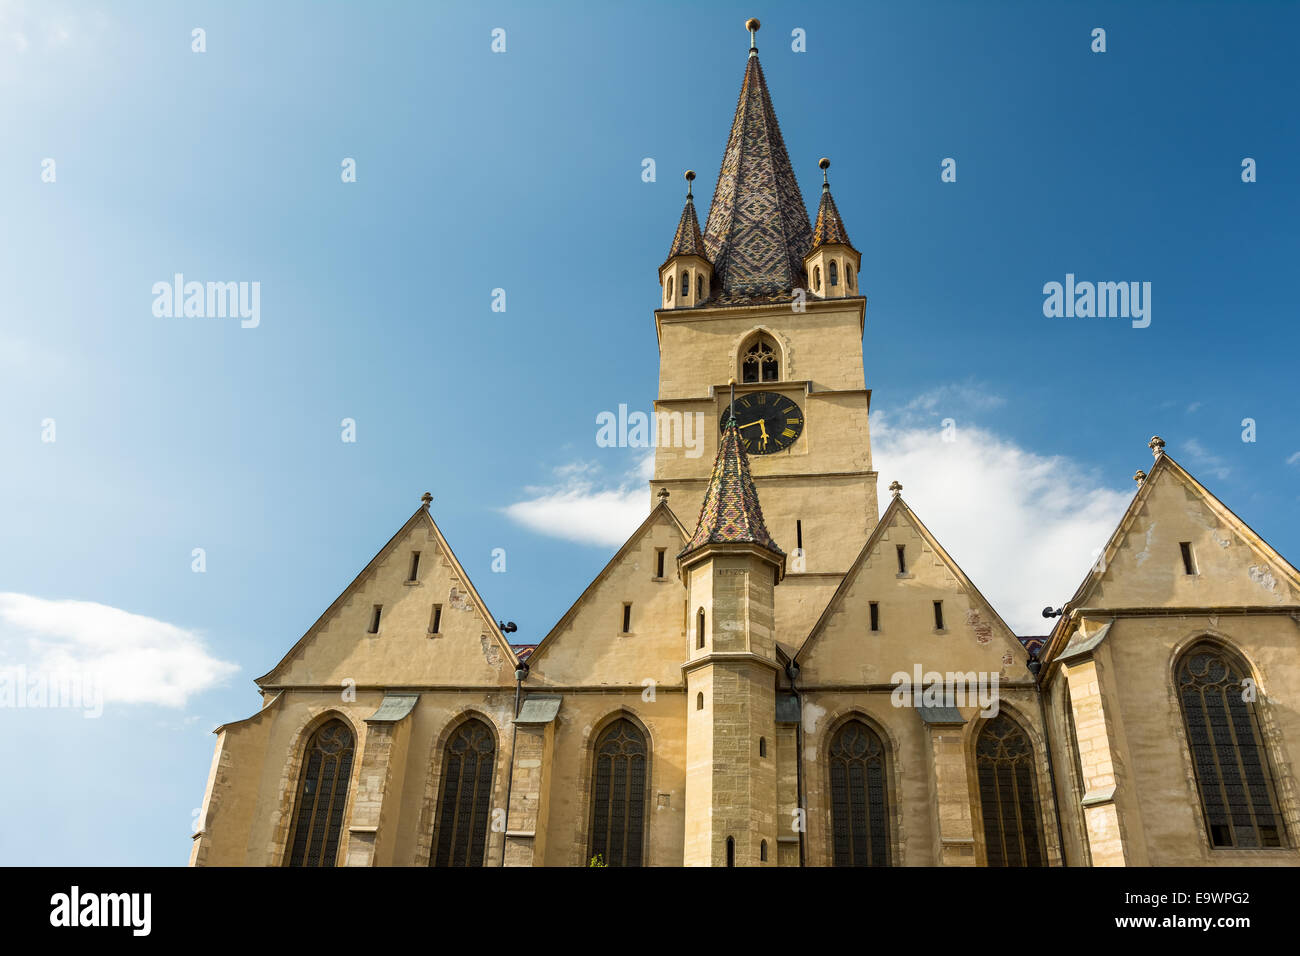 The Lutheran Cathedral of Saint Mary was built in 1530 and is the most famous Gothic-style church in Sibiu, Romania. Stock Photo